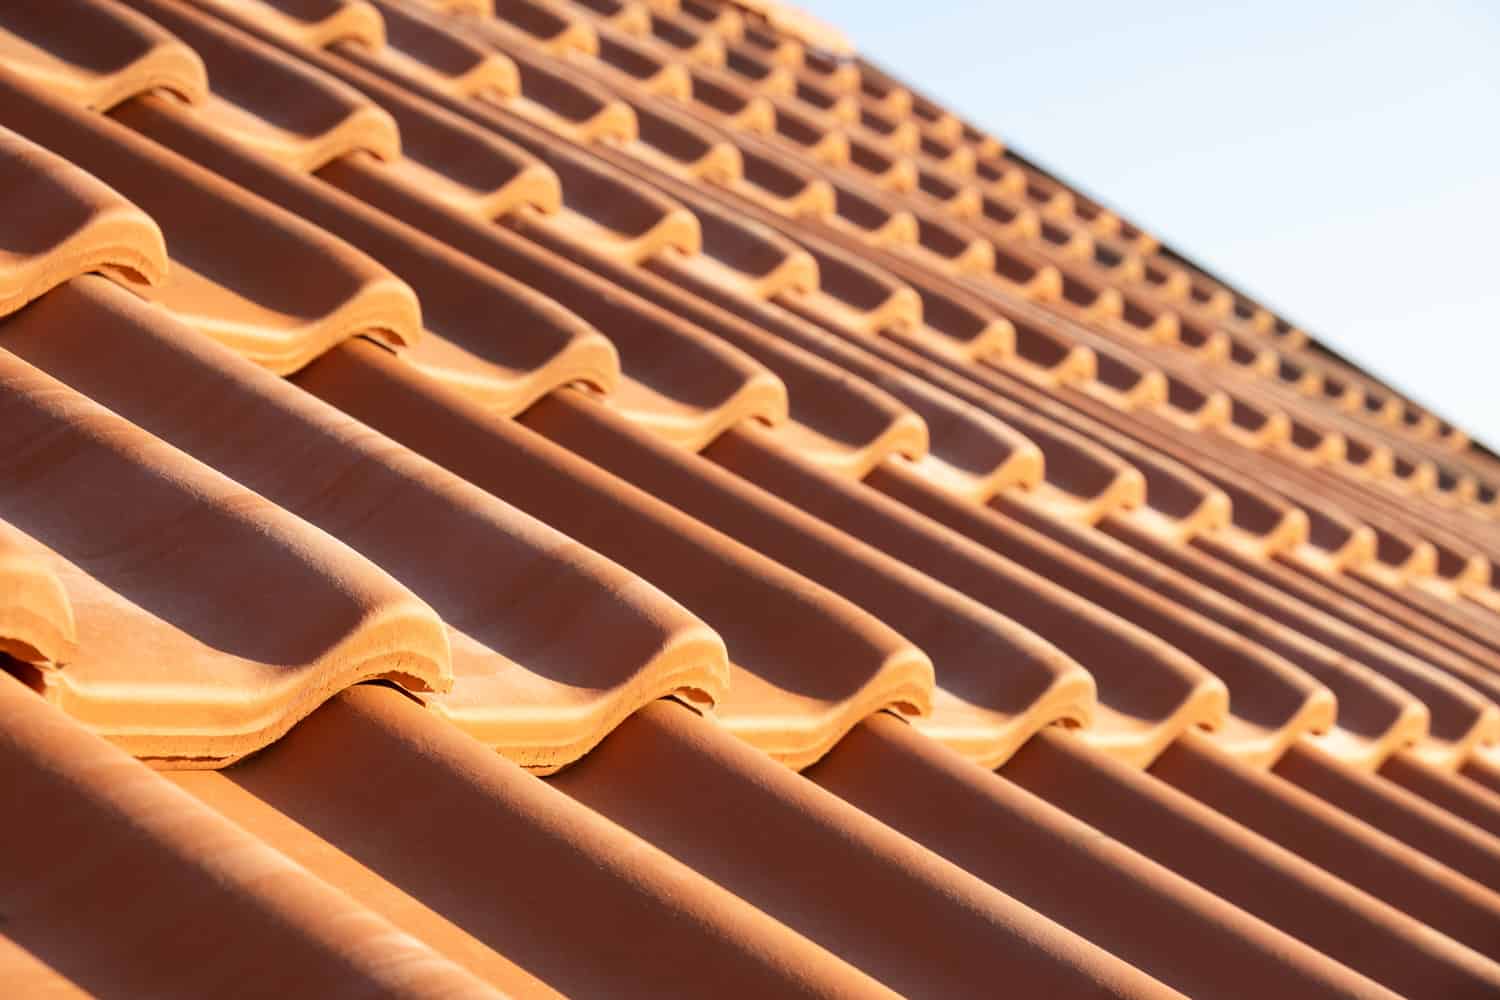 Overlapping rows of yellow ceramic roofing tiles covering residential building roof.
